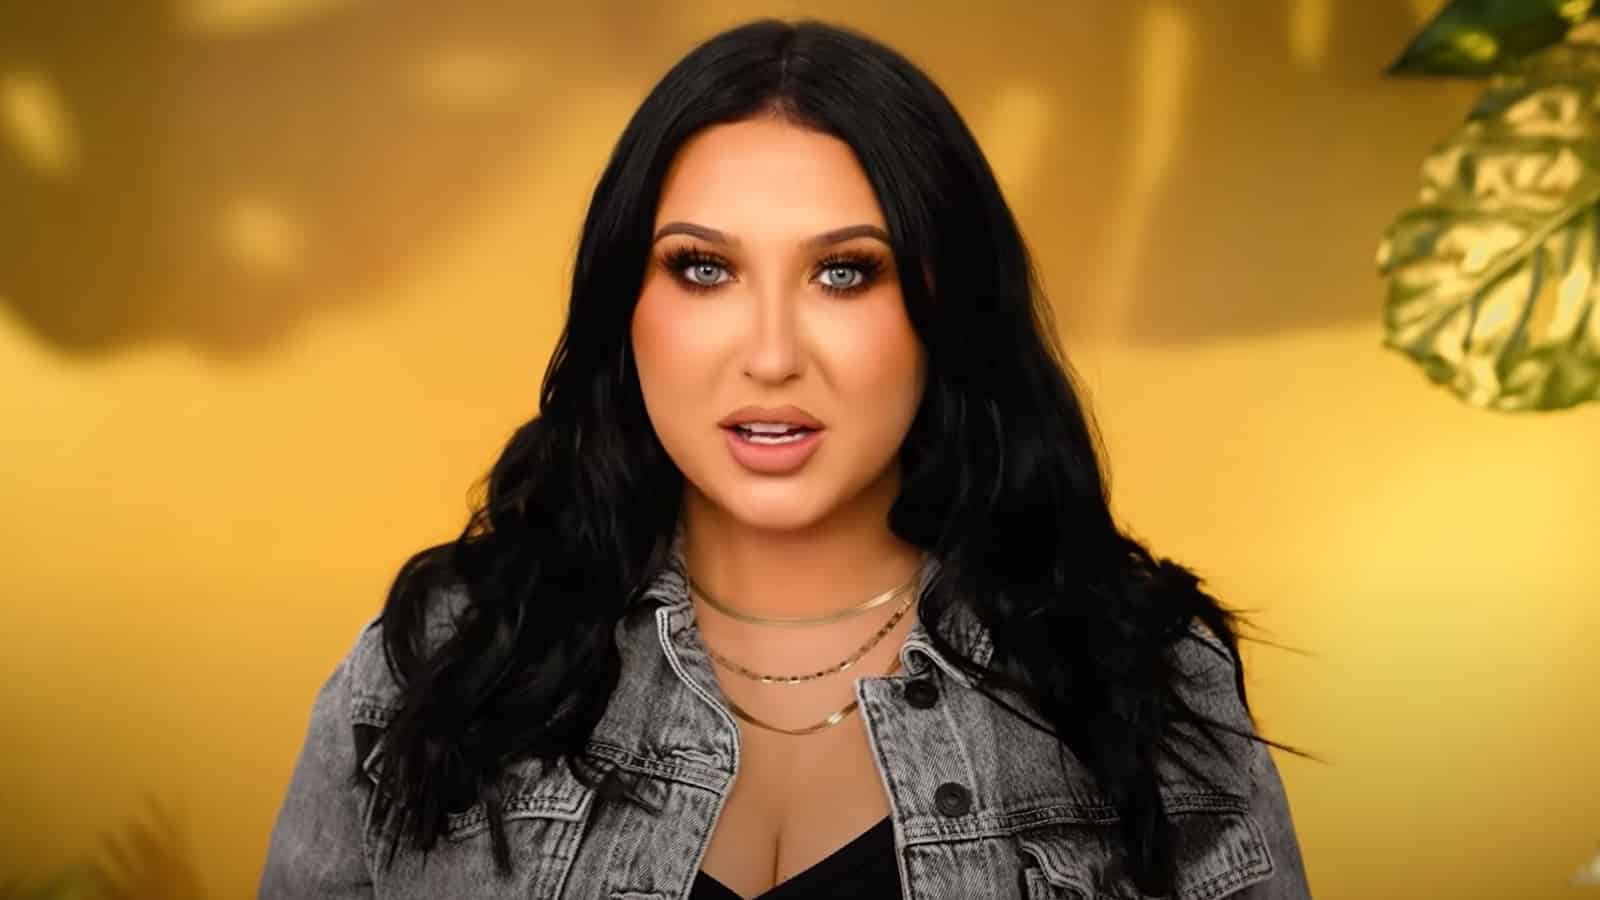 Jaclyn Hill hits back at accusations of “lying” about attempted